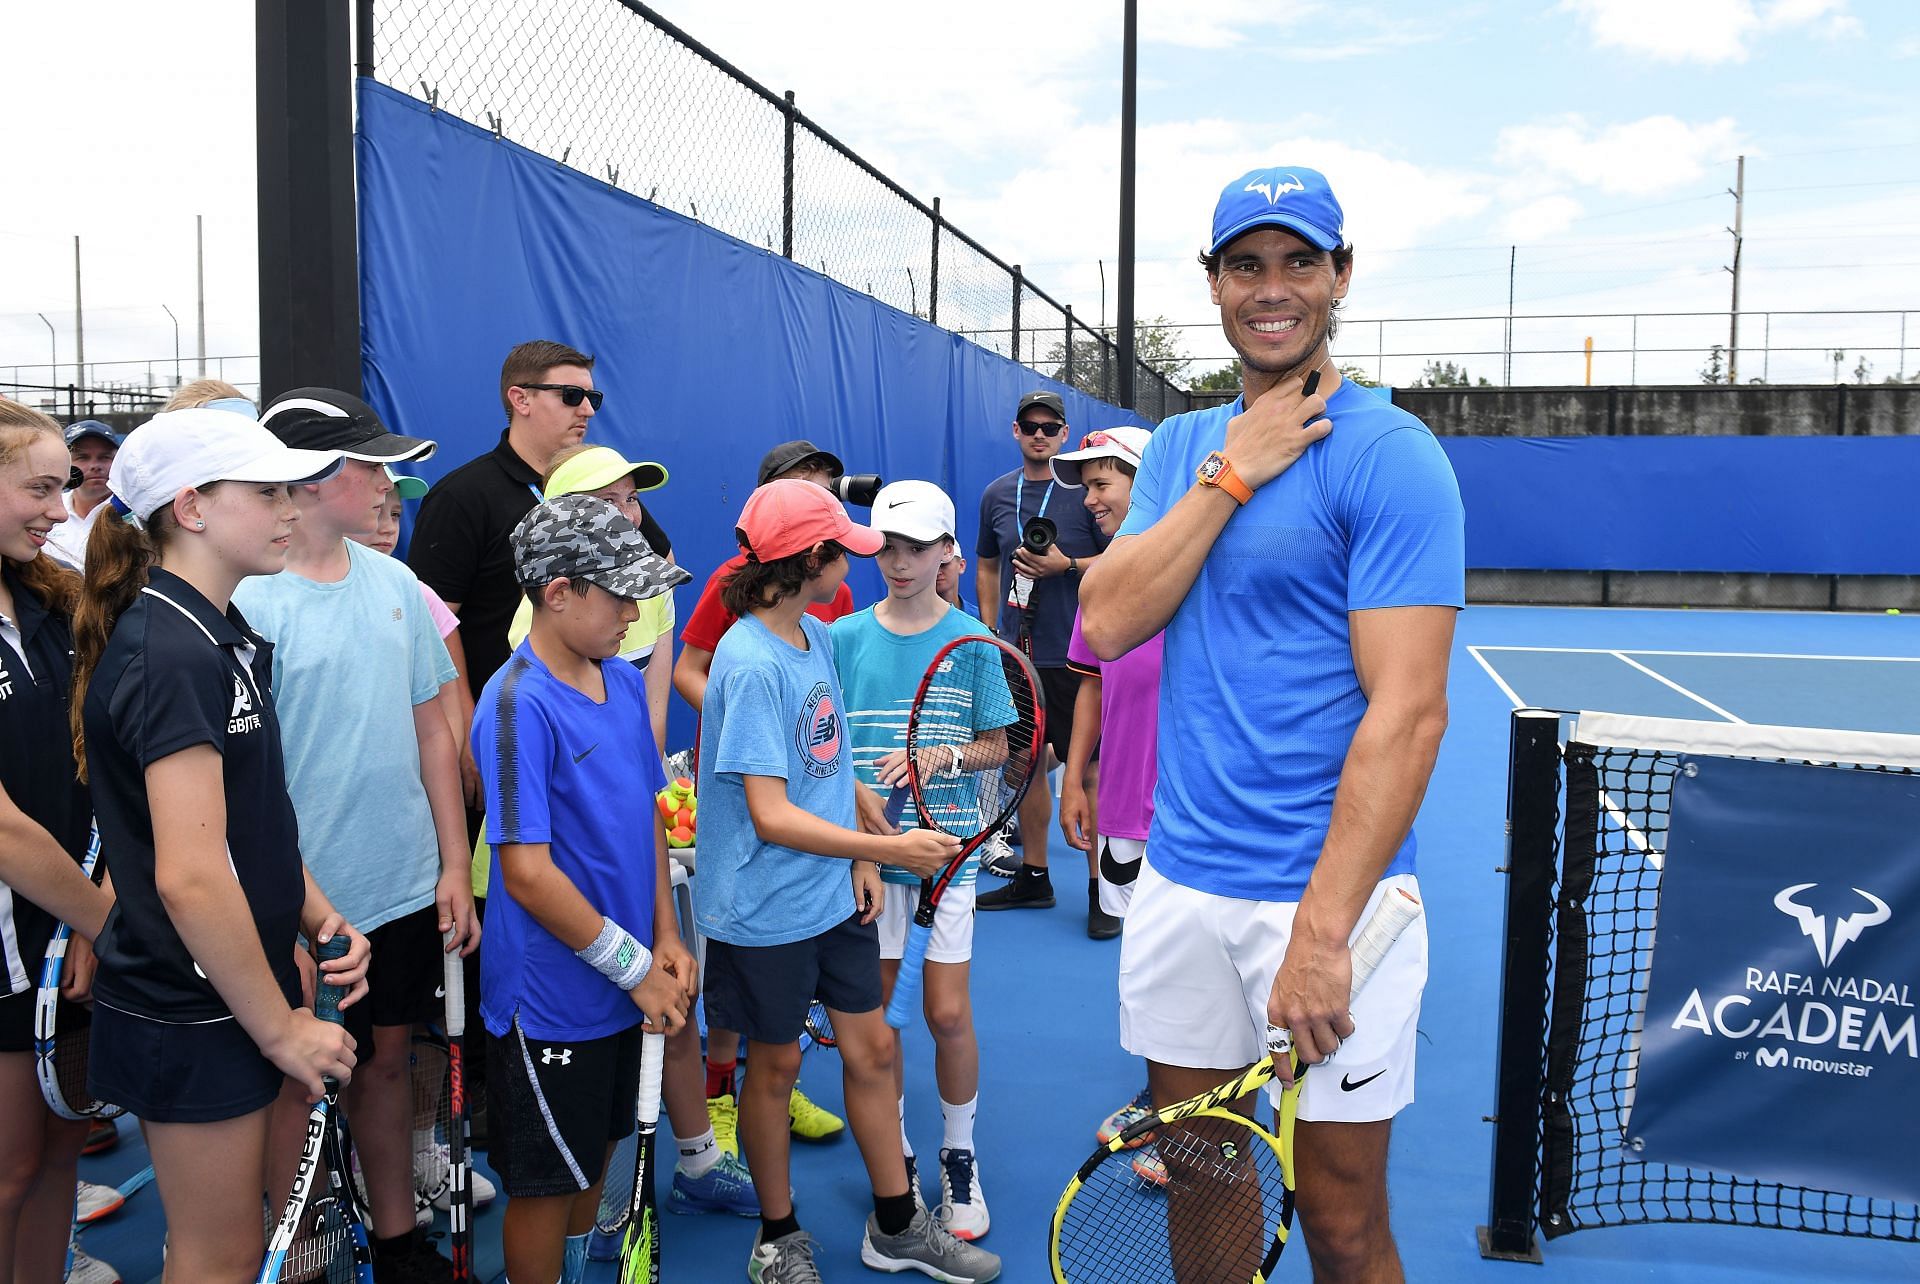 Rafael Nadal interacting with youngsters selected for Rafa Nadal Academy in Brisbane, 2019